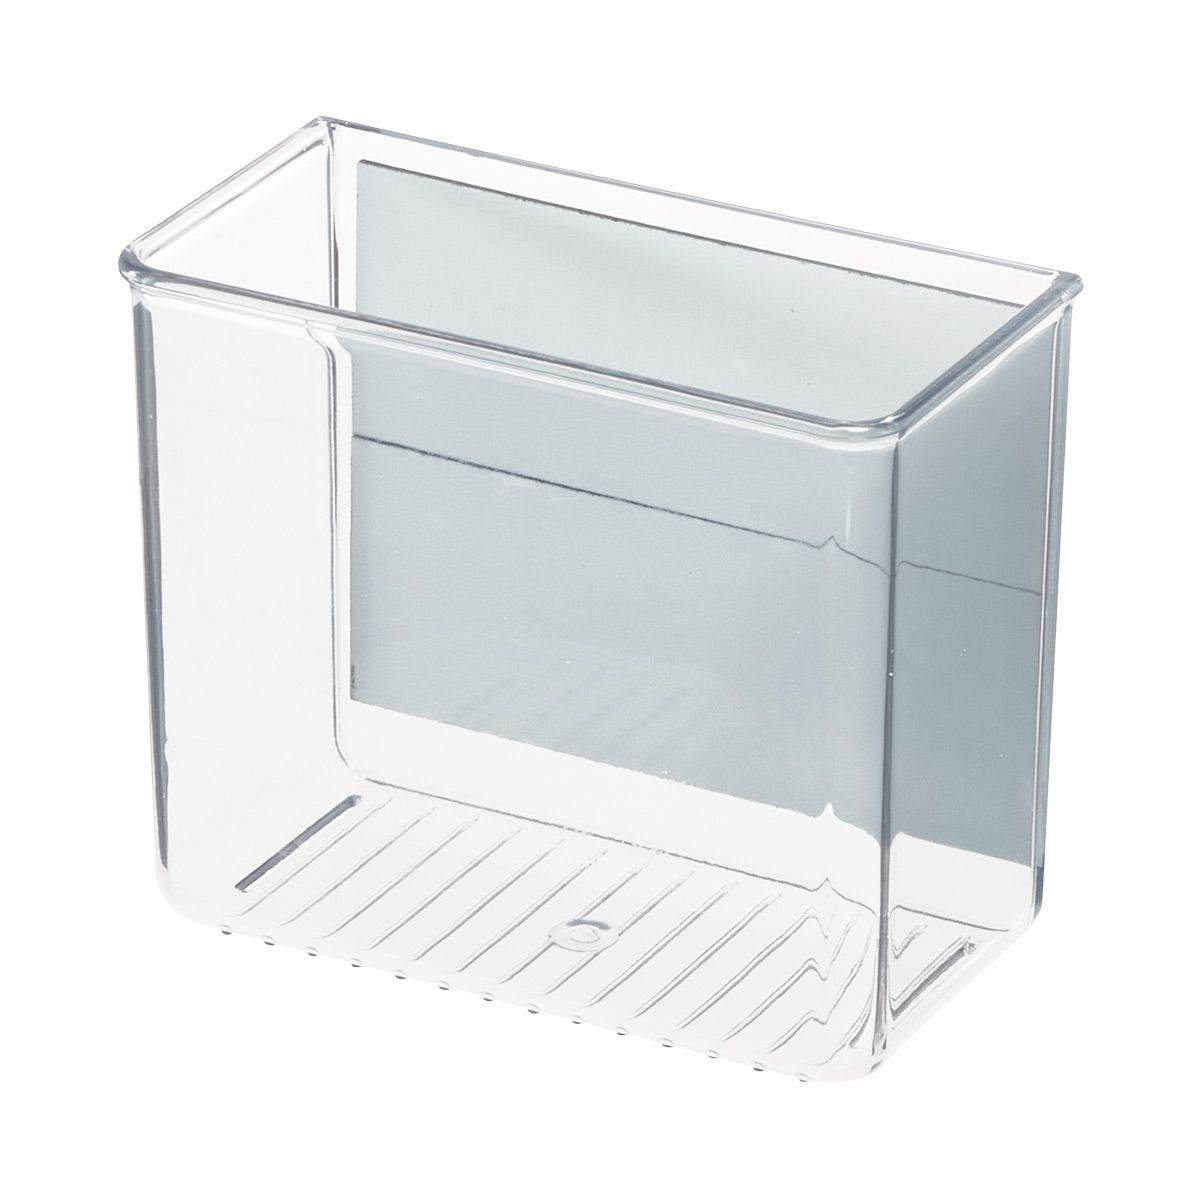 iDESIGN Small Magnetic Bin Clear | The Container Store